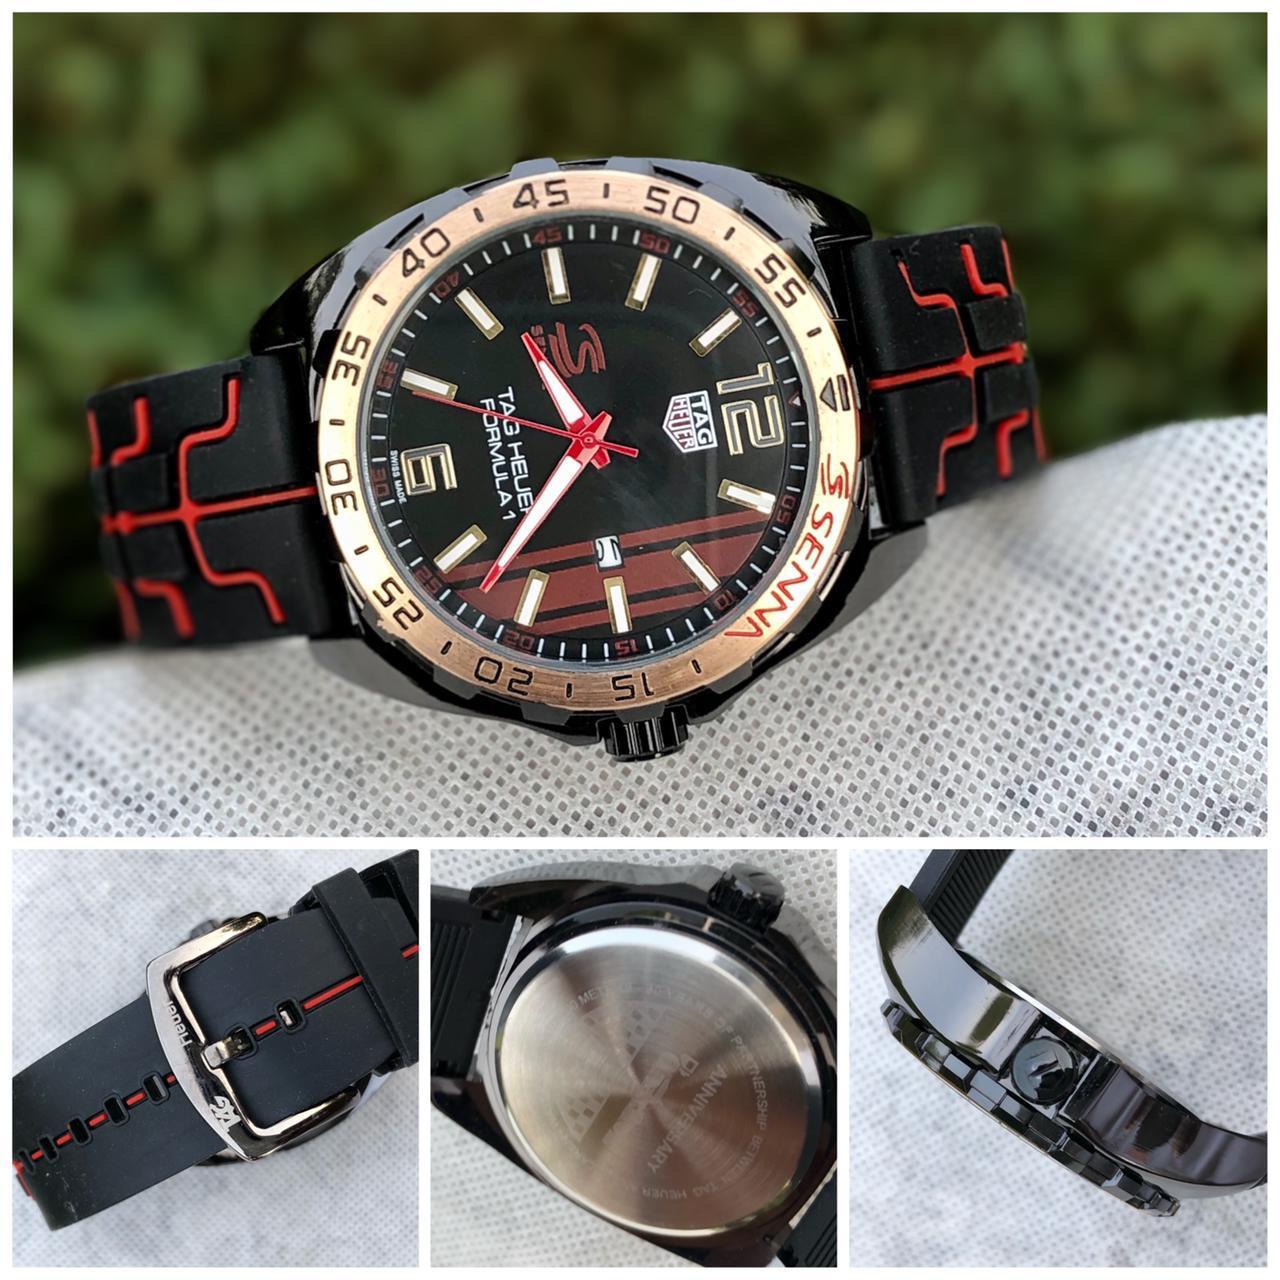 Tag Formula 1 Manchester United Men's Watch